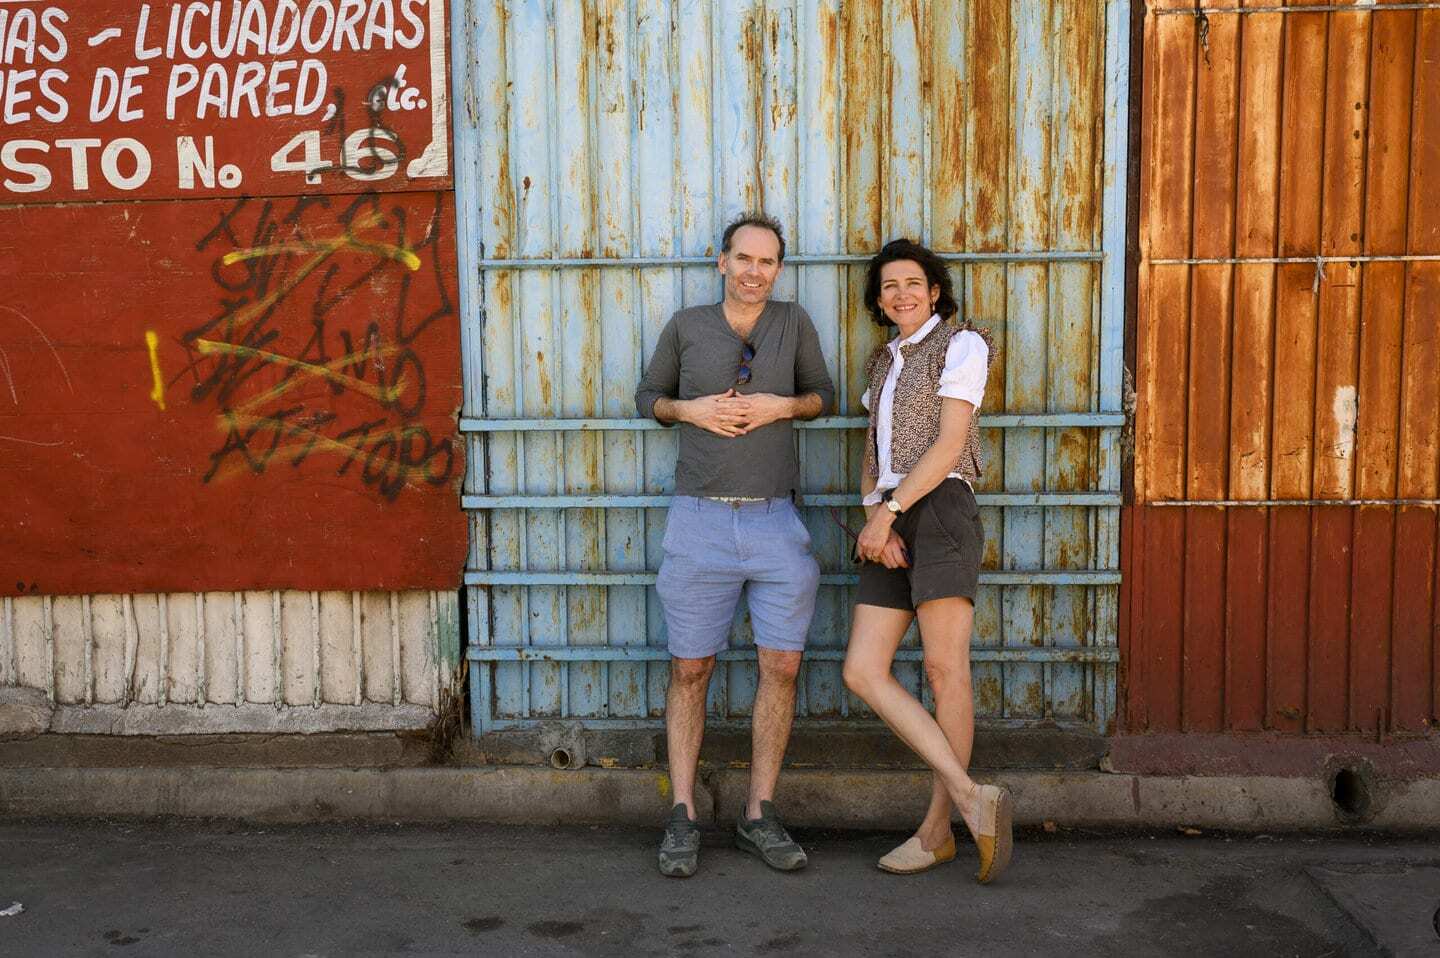 Our co-founders Mark and Tommi in Oaxaca Mexico leaning against a wall outside the central market